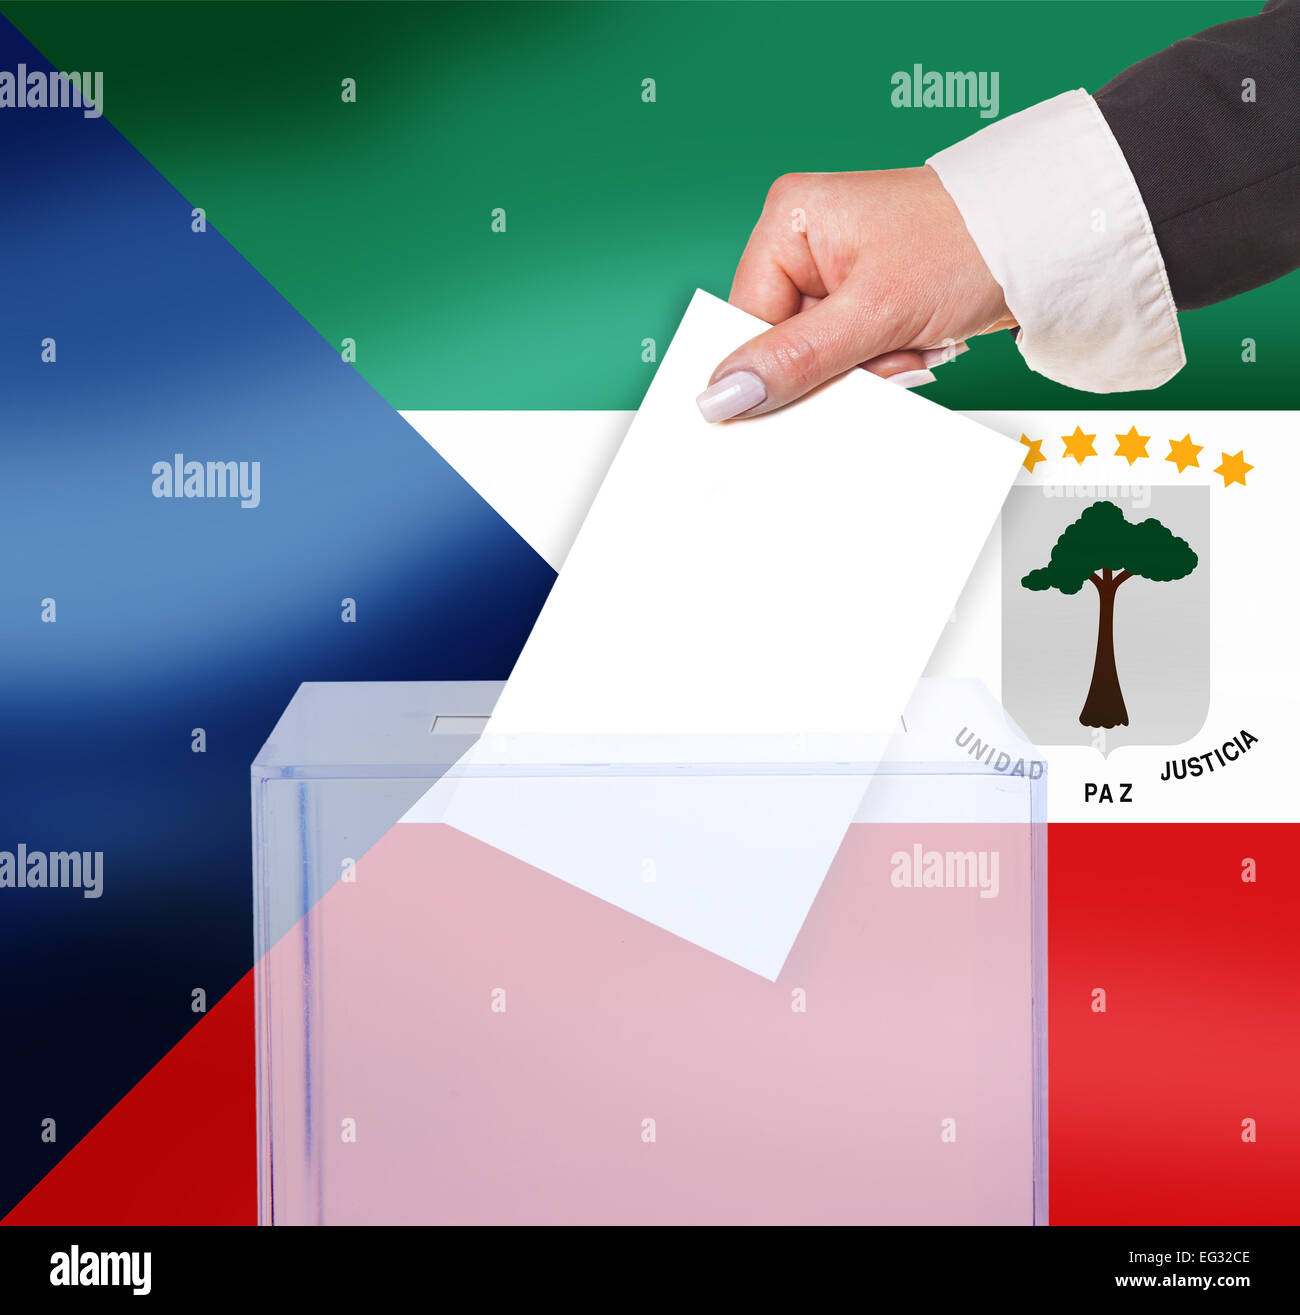 electoral vote by ballot, under the Equatorial Guinea flag Stock Photo